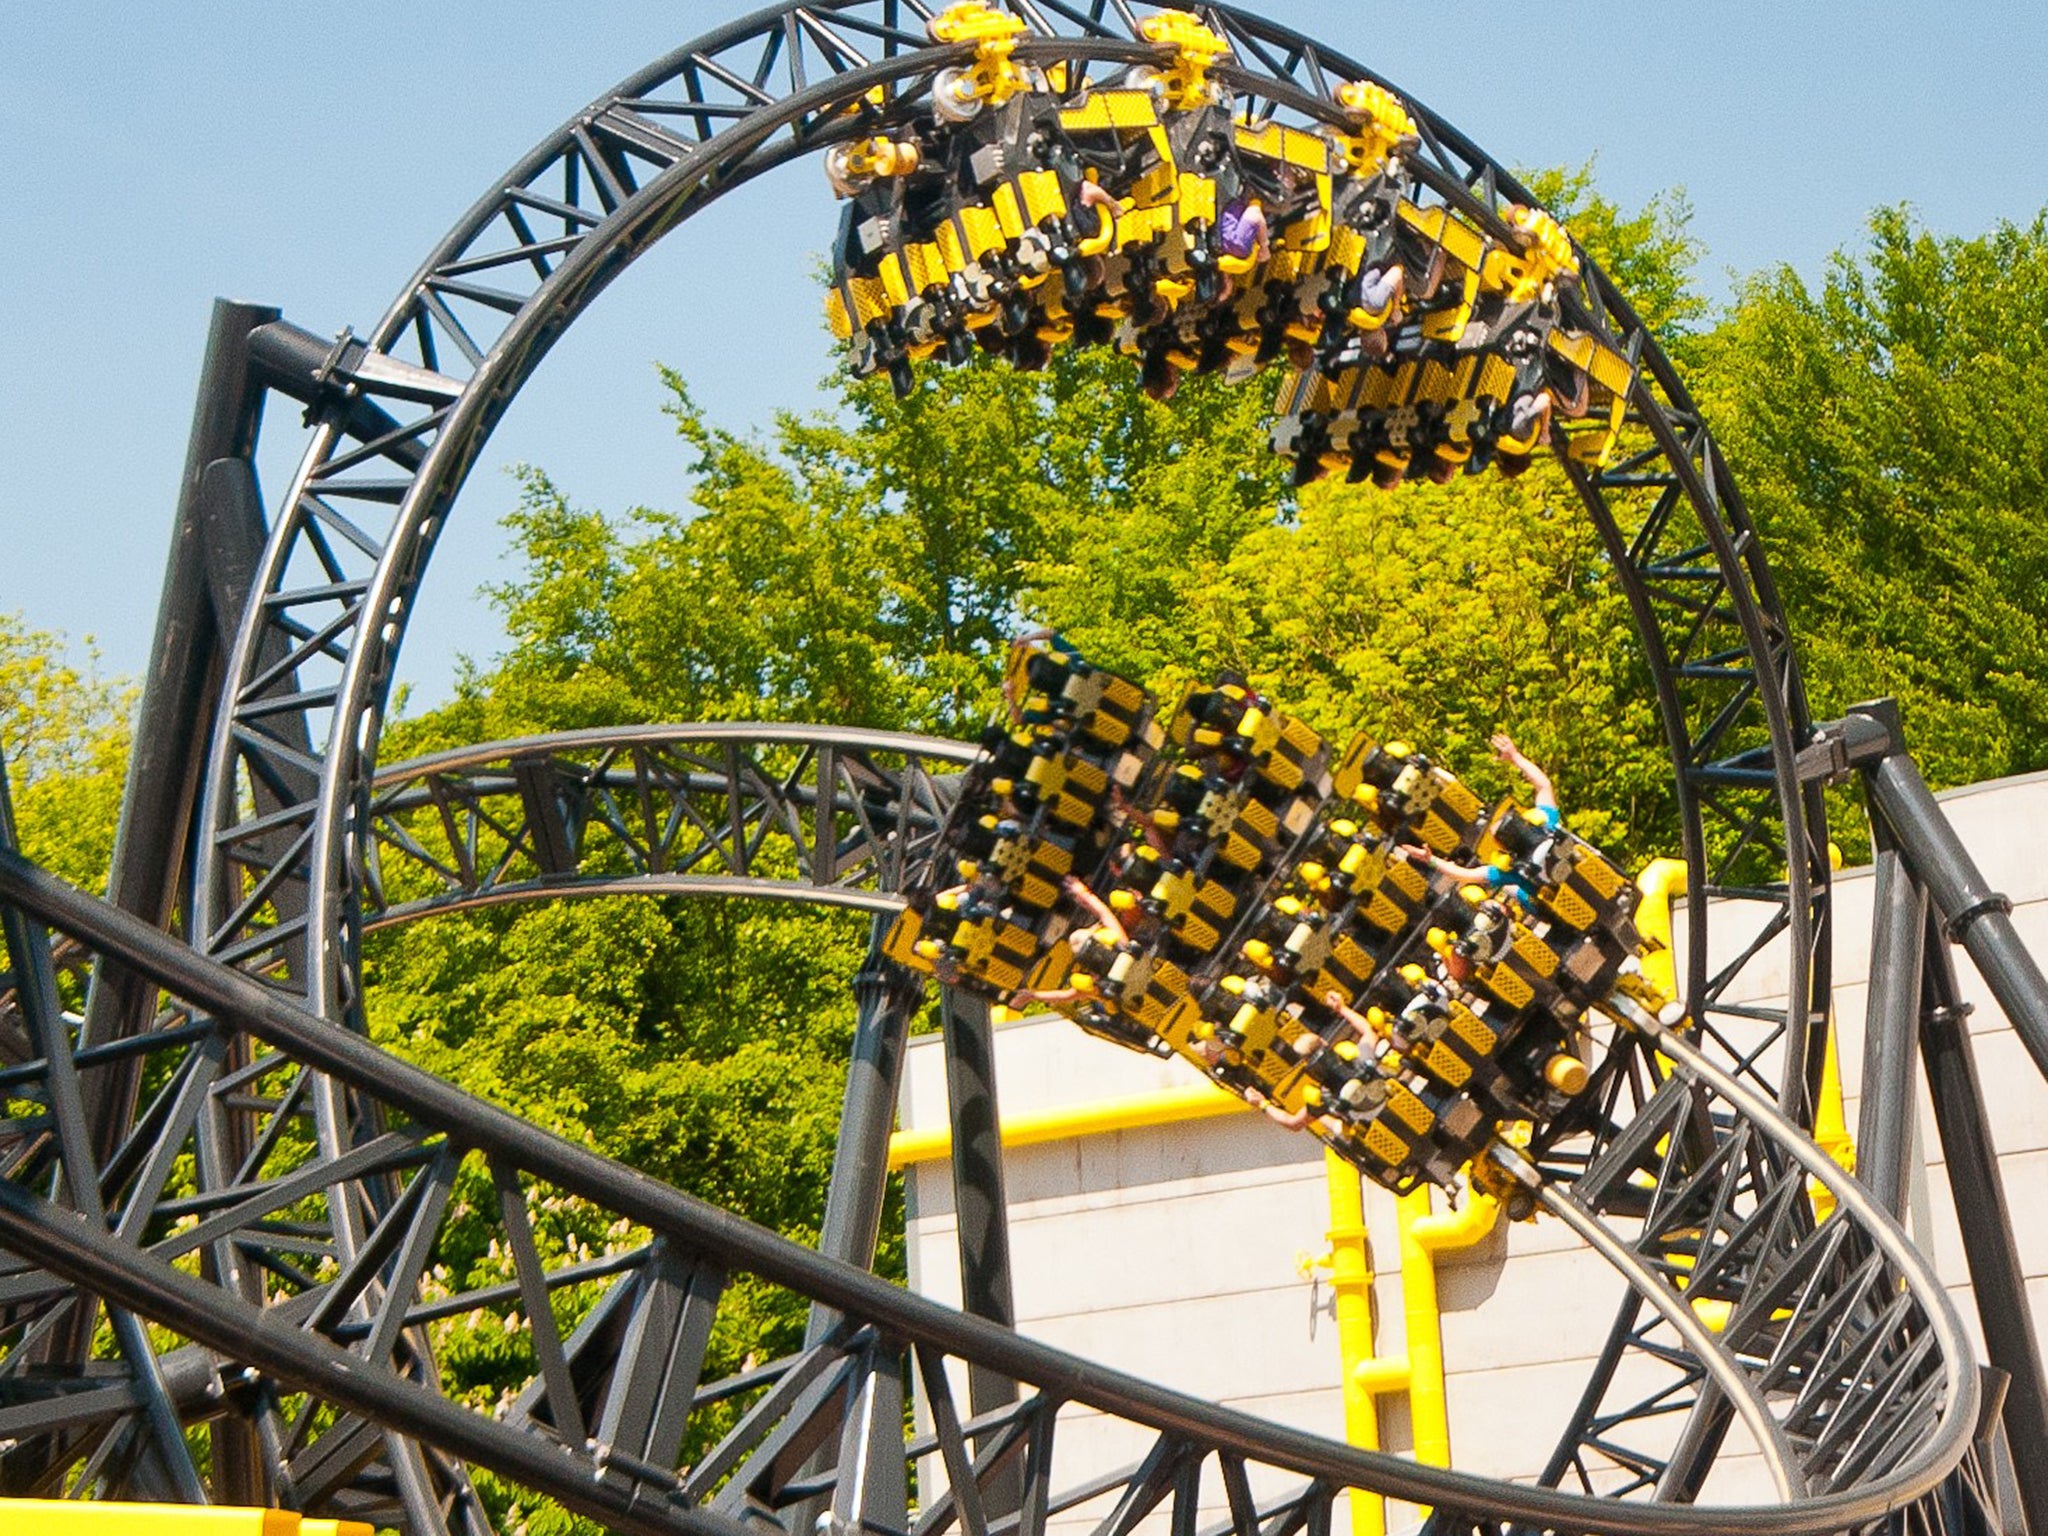 Alton Towers has been accused of putting profits before people by victims